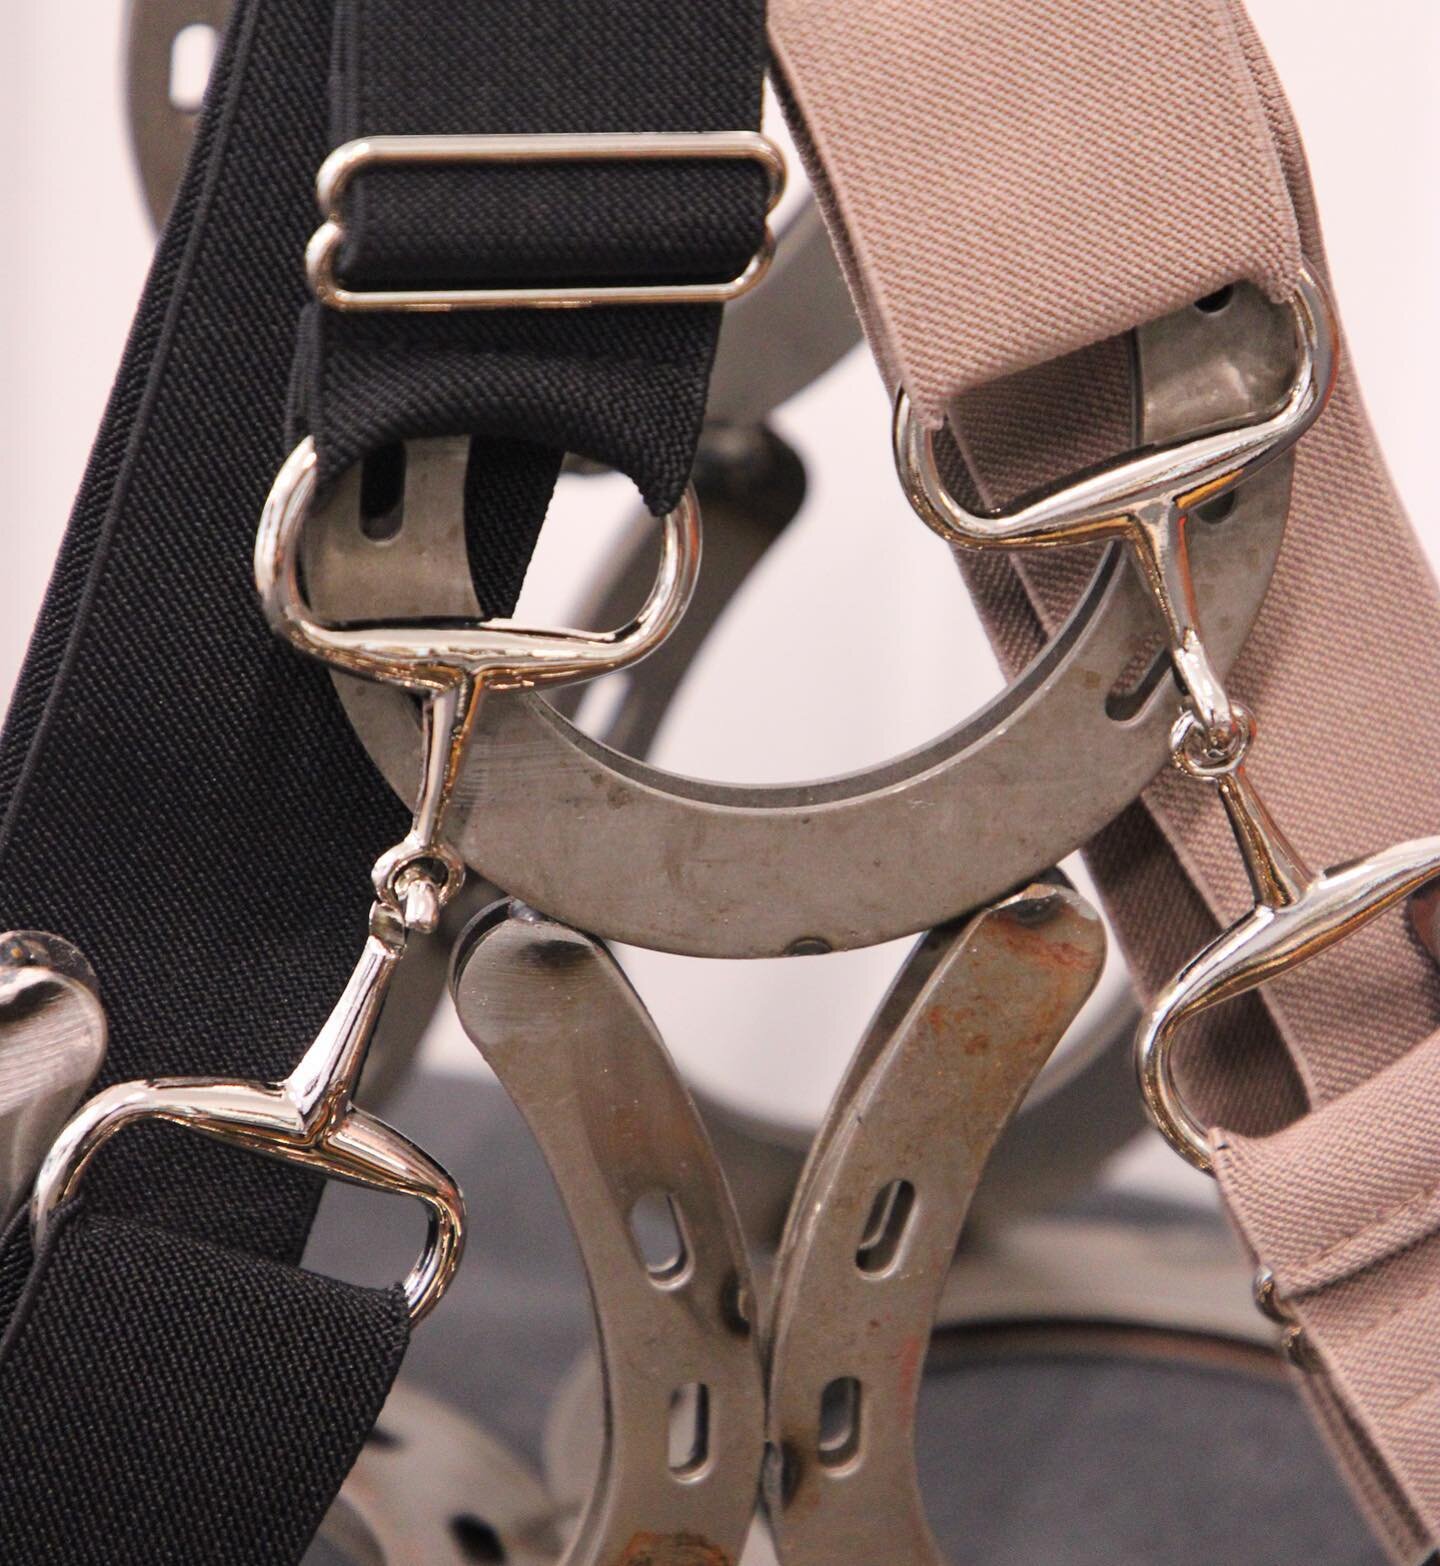 The SNAFFLE BIT BELT to accessorize any Equestrian Look! @the.modern.horse or stop by our pop up shop @worldequestriancenter Ocala in Indoor 2! 

#equestrianbelt #equestrianlifestyle #equestrianstyle #equestriansubscriptionbox #themodernhorse #popups